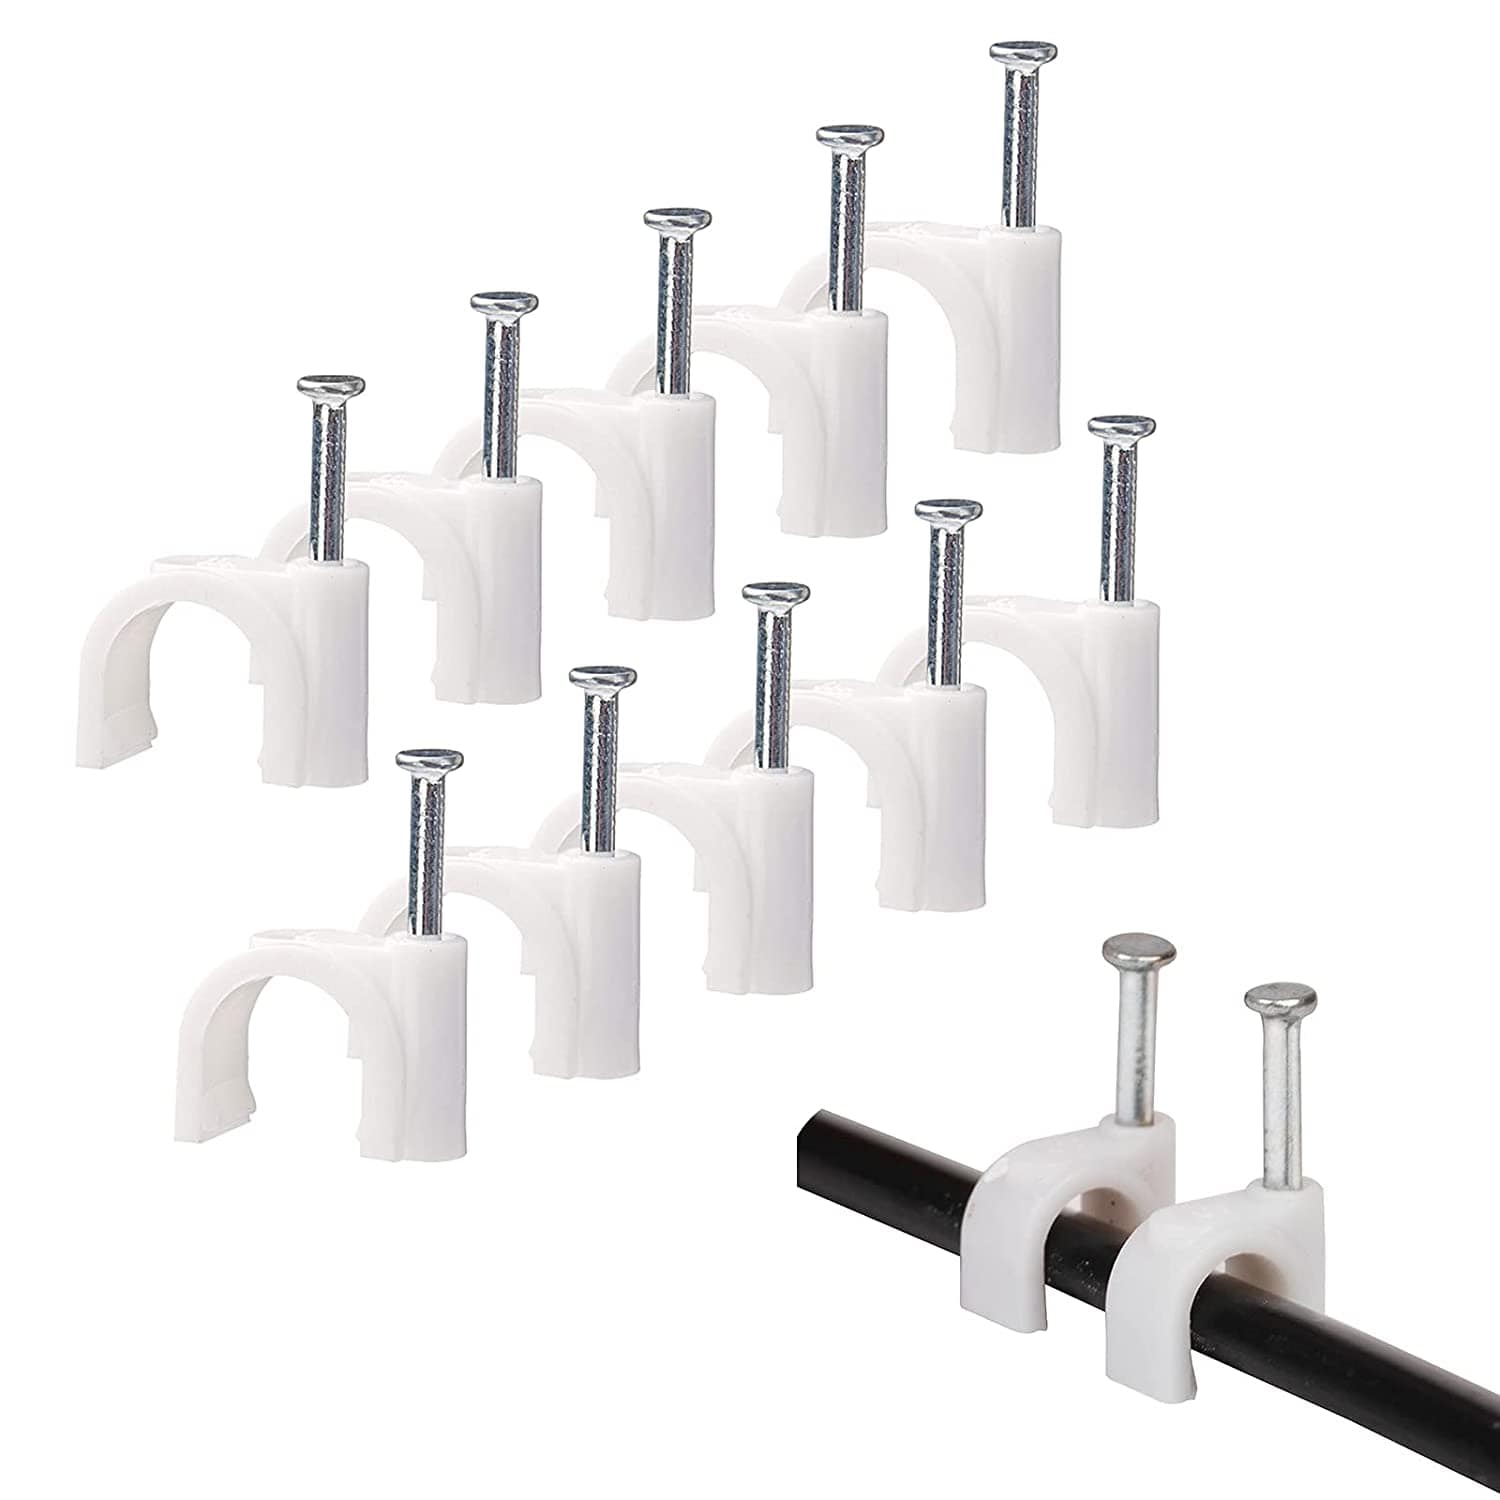 Tower Clips | Supply Master | Accra, Ghana Fasteners Buy Tools hardware Building materials